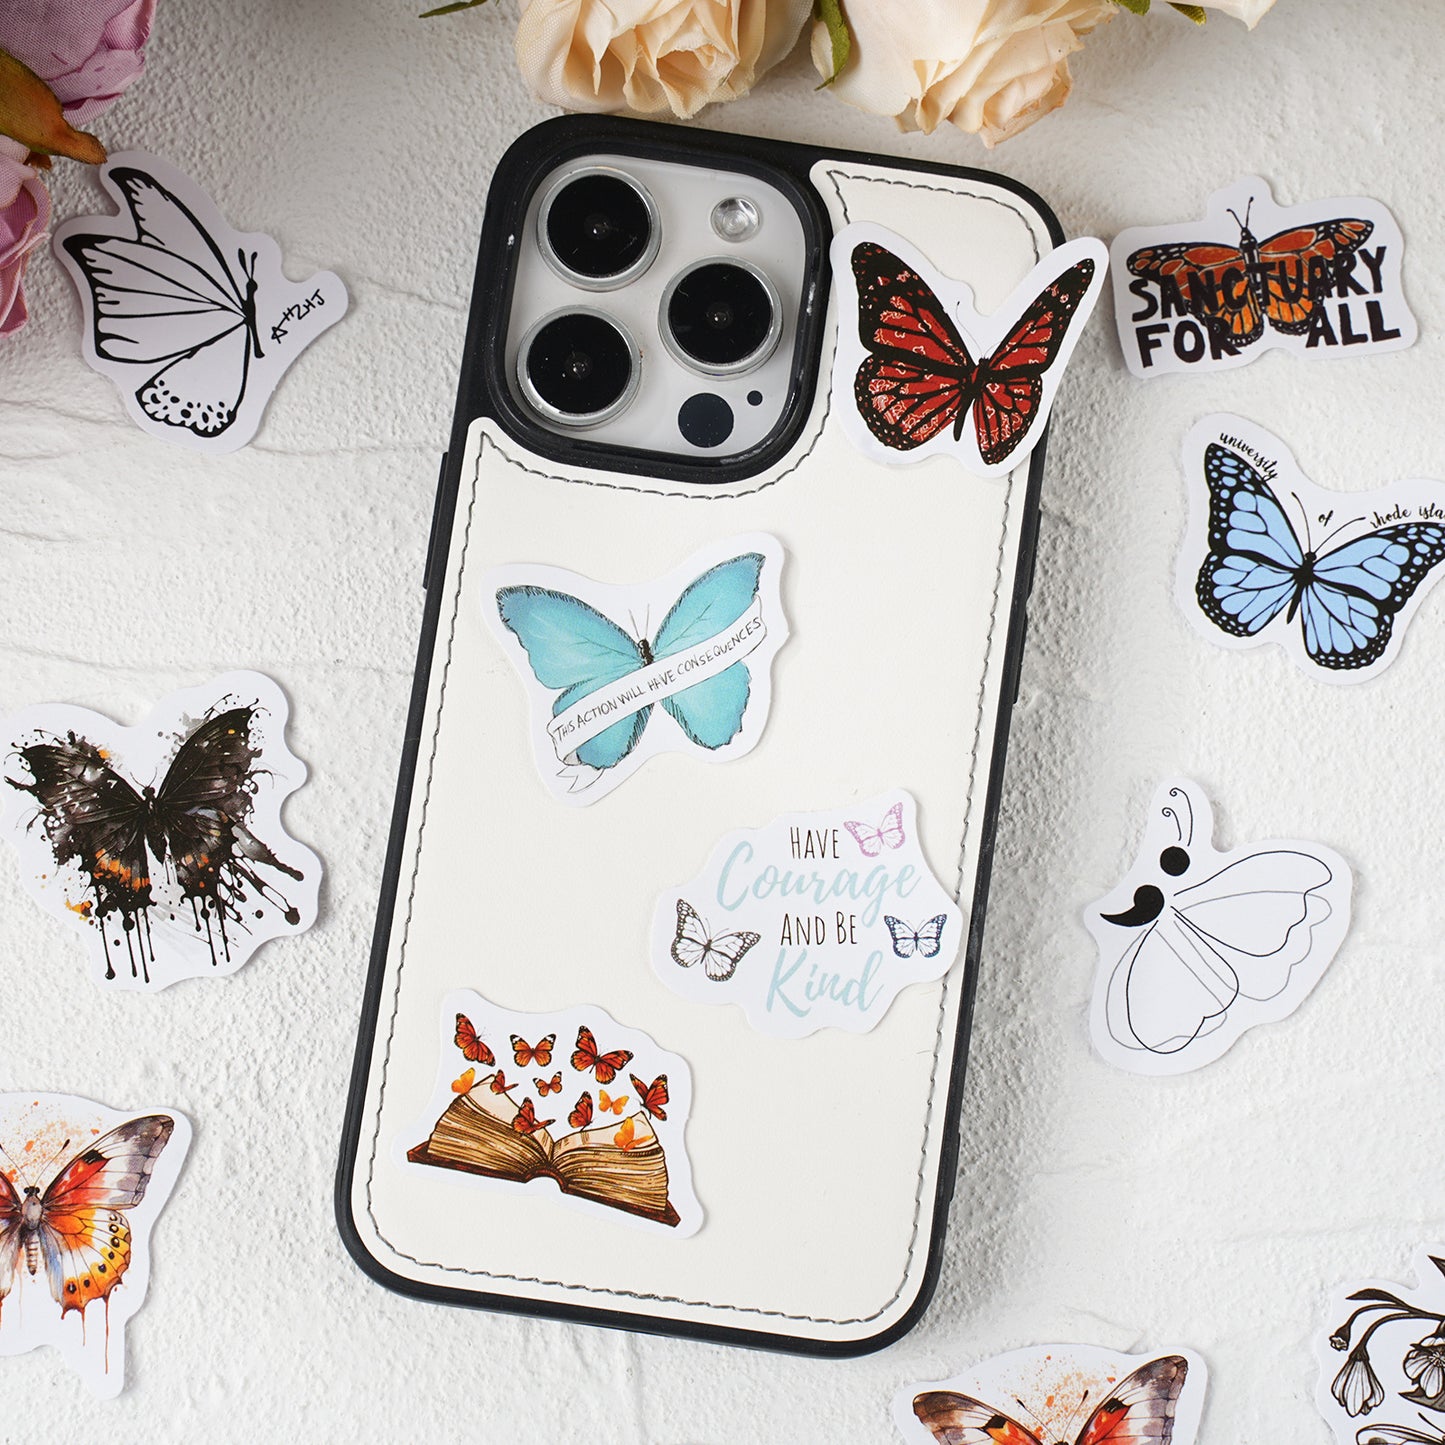 46 Pcs Butterfly Boxed Stickers HDXY